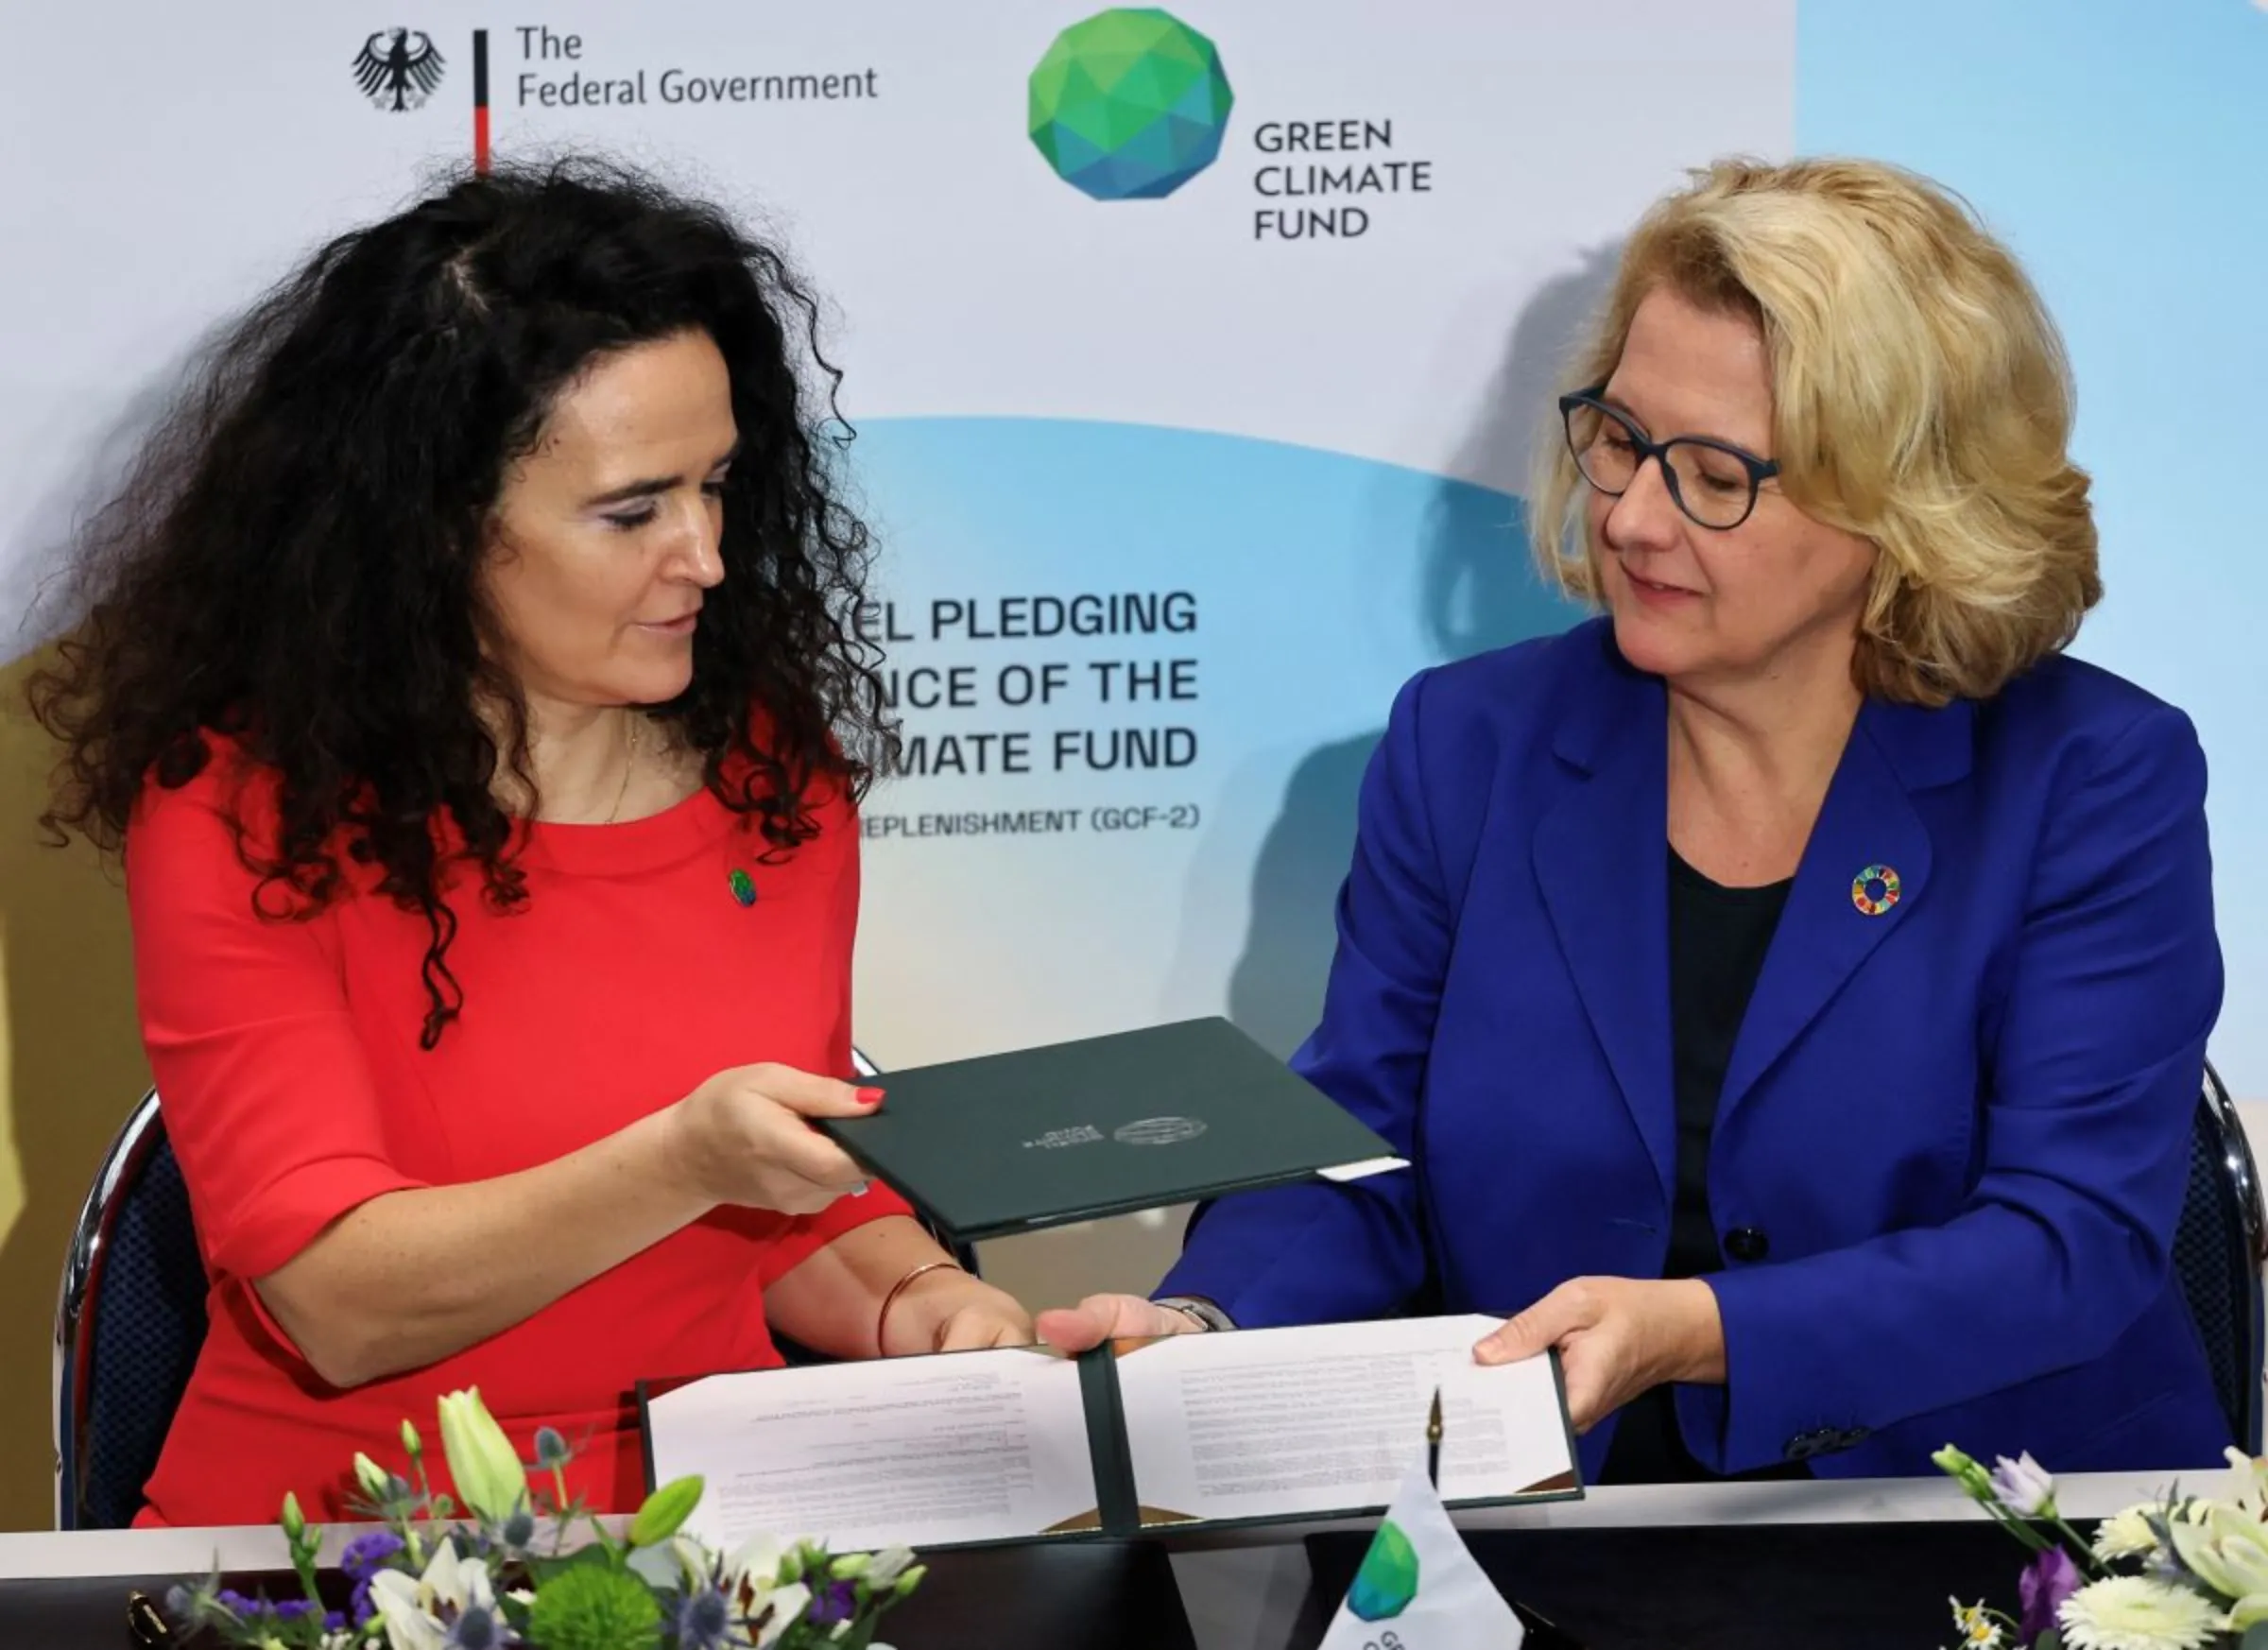 Mafalda Duarte, the executive director of the Green Climate Fund (GCF) and German Economic Cooperation and Development Minister Svenja Schulze exchange a treaty during a signing ceremony ensuring developing countries raise and realise their climate ambitions ahead of C0P28 when countries will respond to the Global Stocktake and closing the gaps to 2030, in Bonn, Germany, October 5, 2023. REUTERS/Wolfgang Rattay